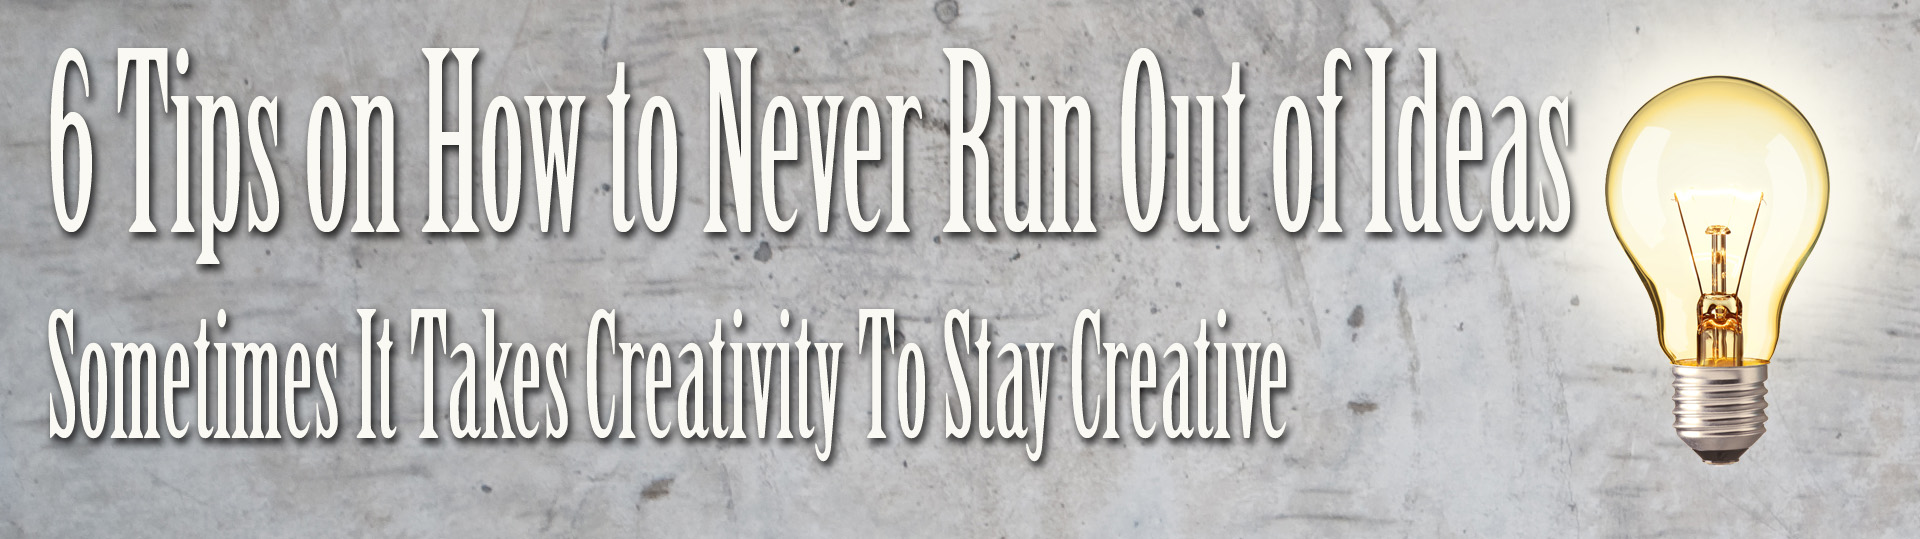 6 Tips on How to Never Run Out of Ideas